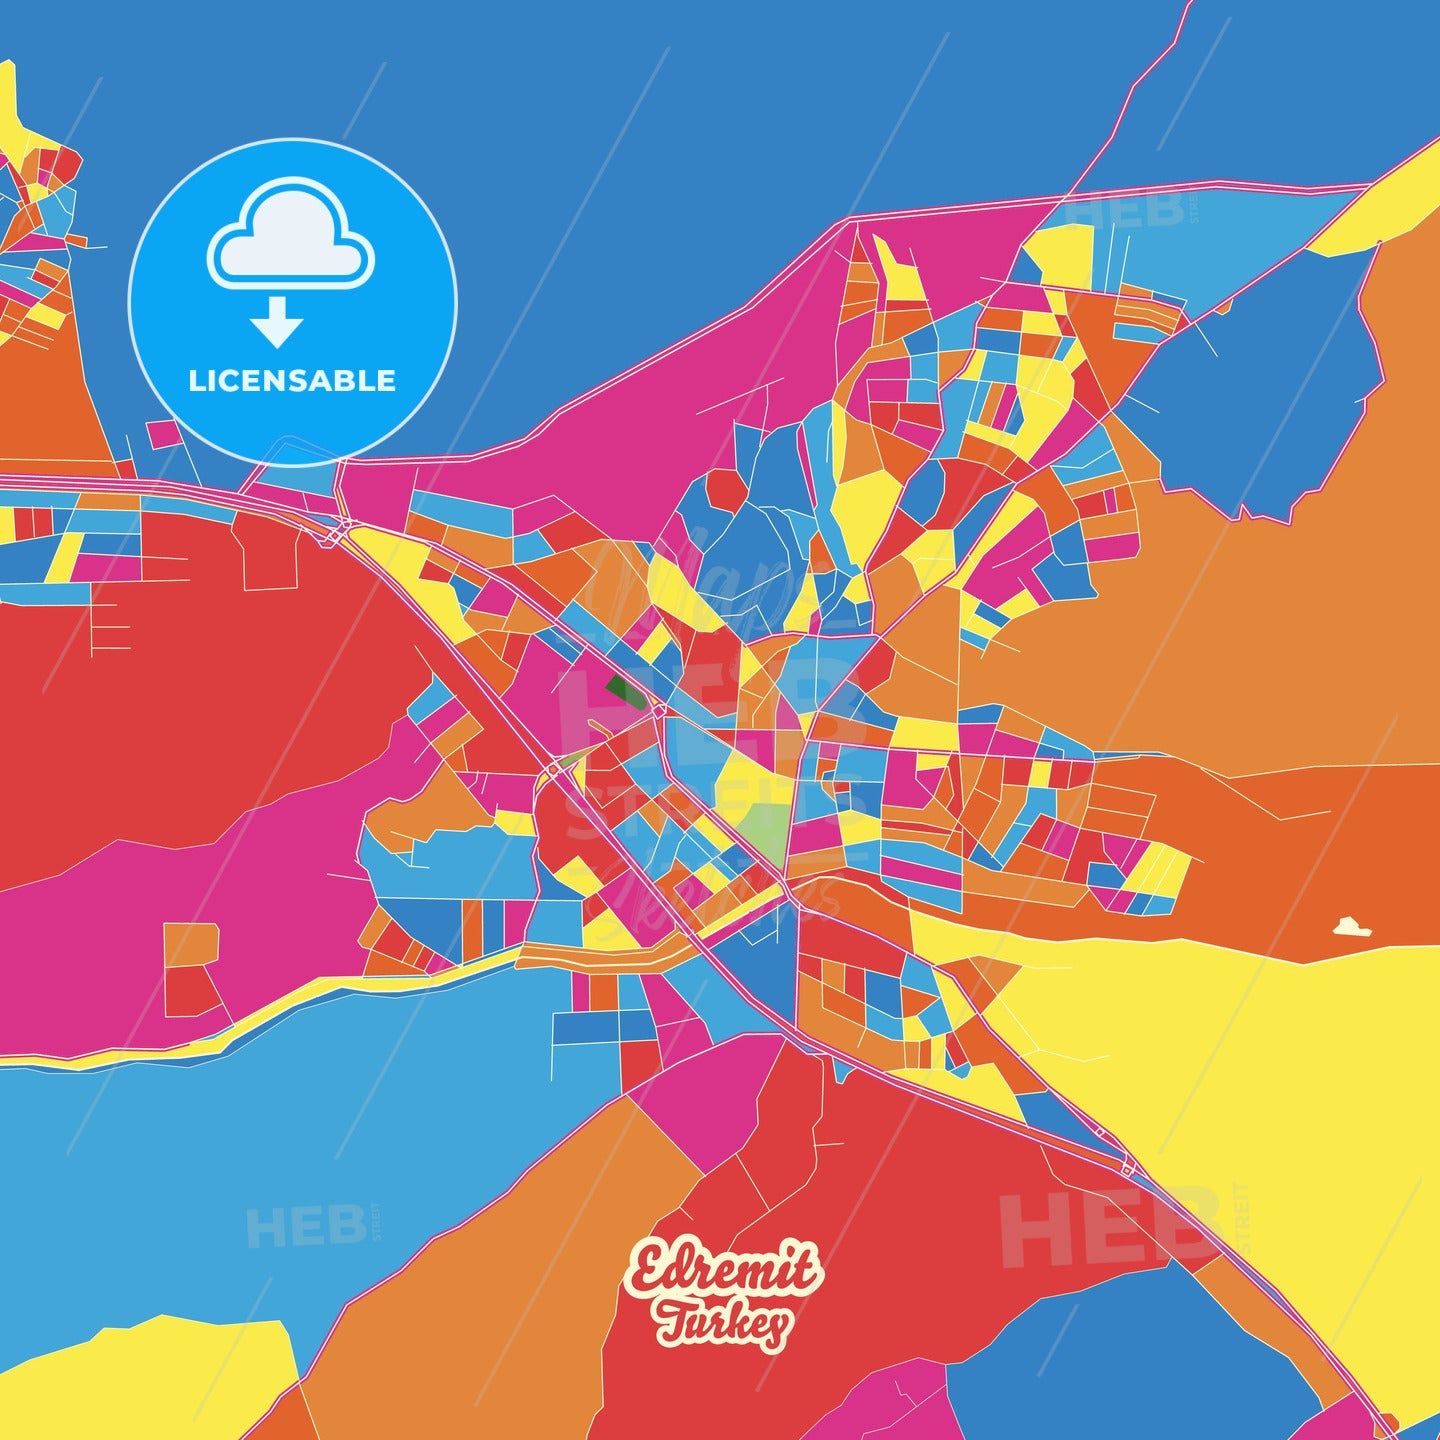 Edremit, Turkey Crazy Colorful Street Map Poster Template - HEBSTREITS Sketches